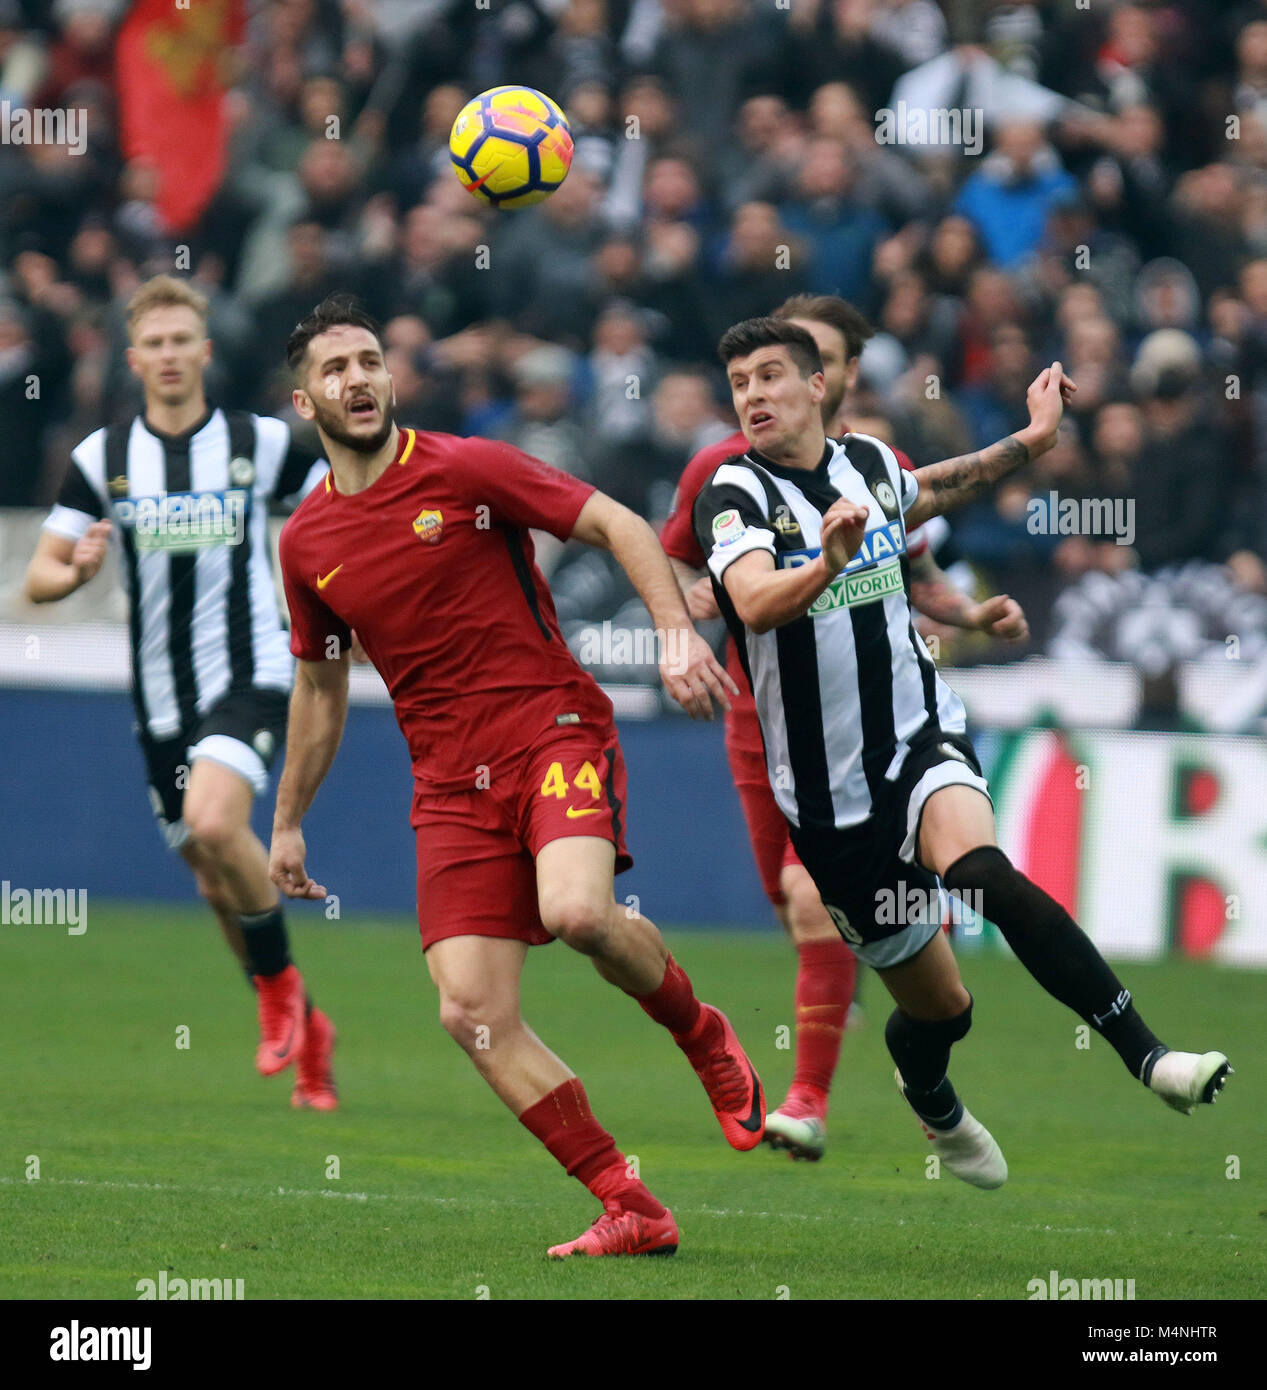 Udine, Italy. 17th Feb, 2018. Roma's defender Kostas Manolas (L) vies with Udinese's forward Stipe Perica (R) during the Serie A football match between Udinese Calcio v AS Roma at Dacia Arena Stadium on 17th February, 2018. Credit: Andrea Spinelli/Alamy Live News Stock Photo